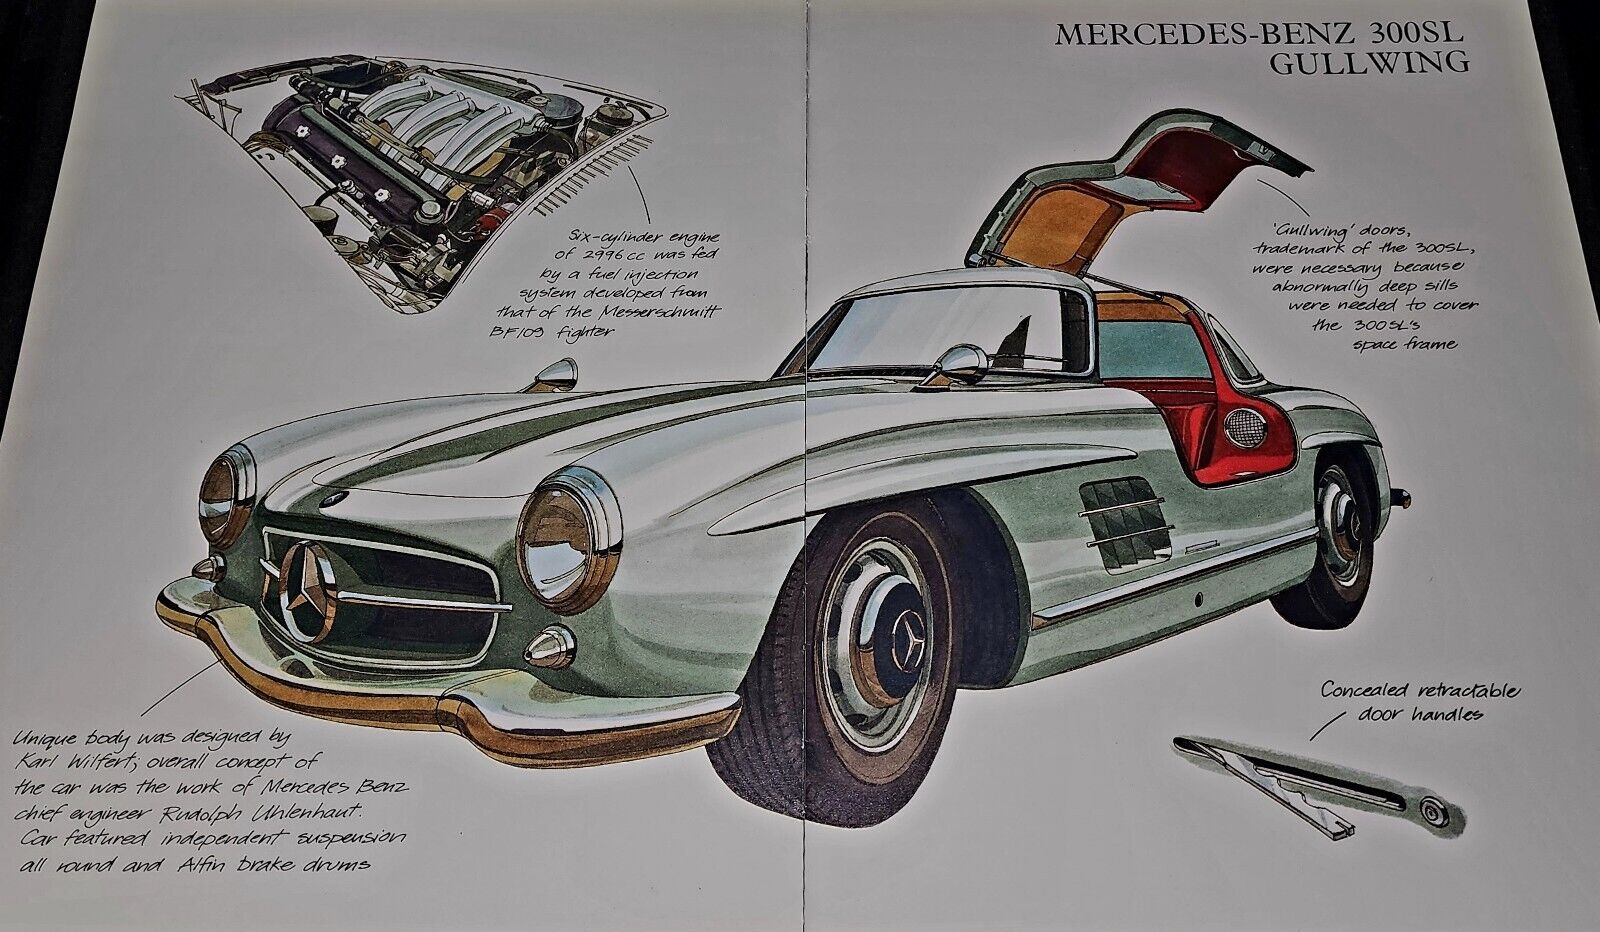 GULLWING ~ Mercedes Benz 300SL Automobile Illustrated Collectible Article Print